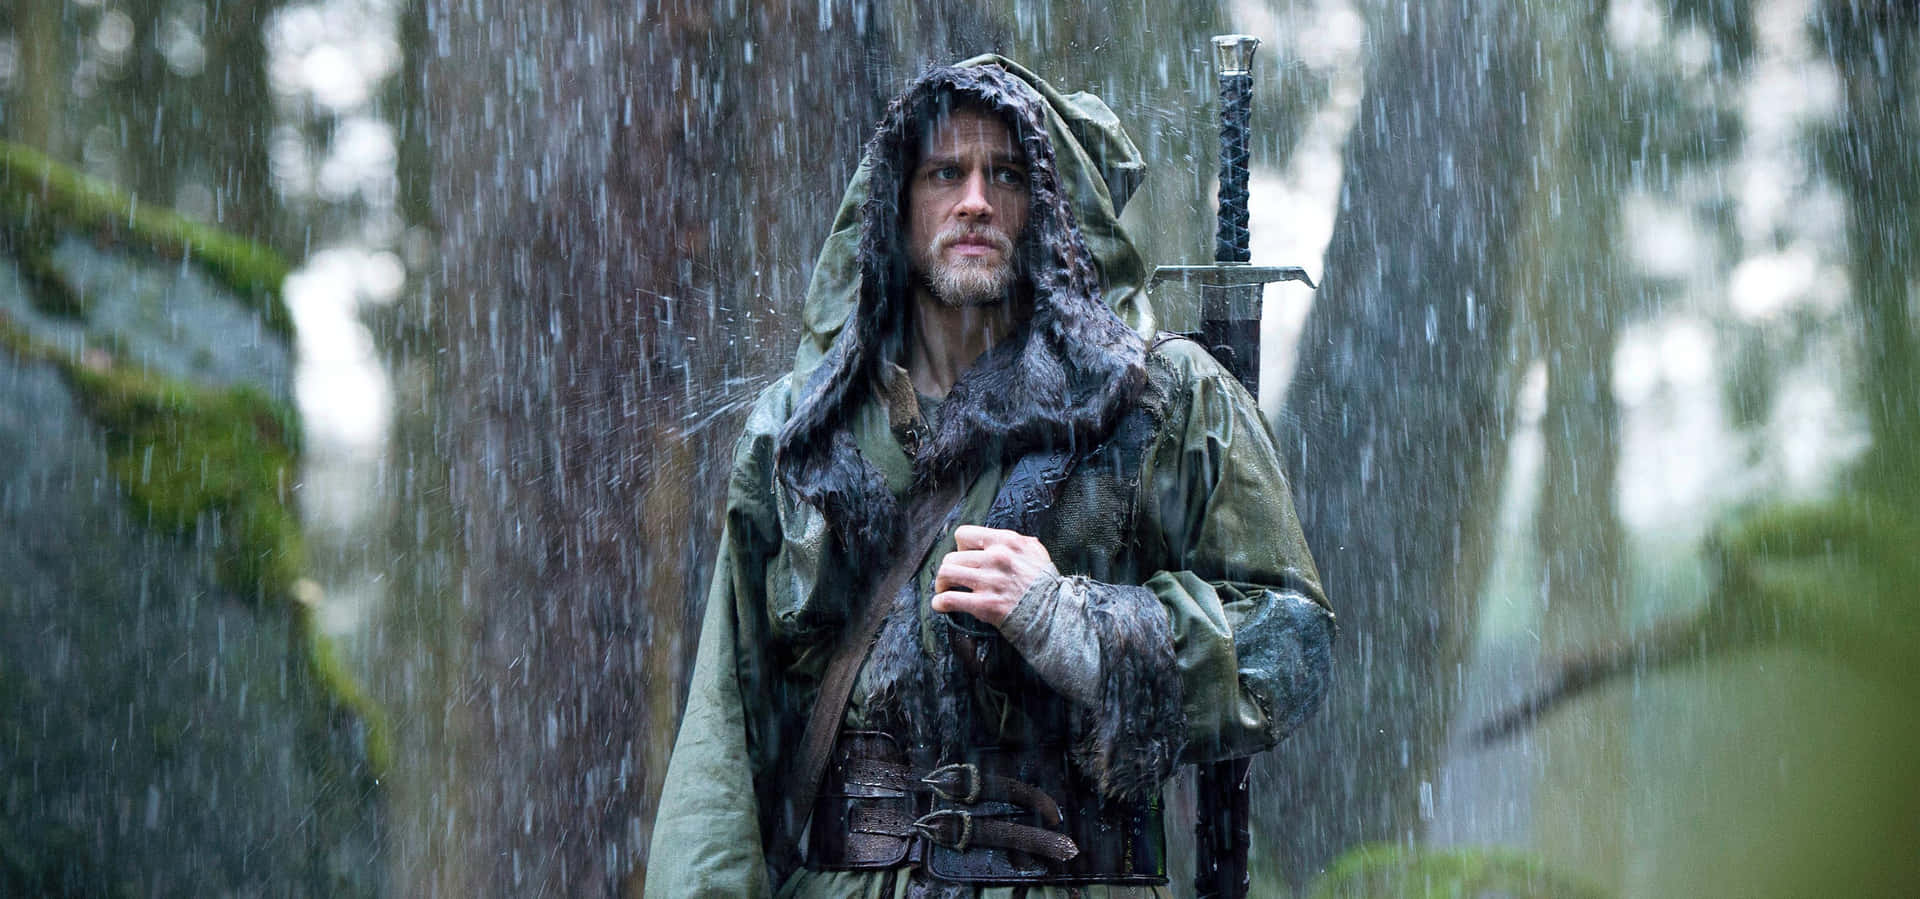 A Man In A Raincoat Holding A Sword